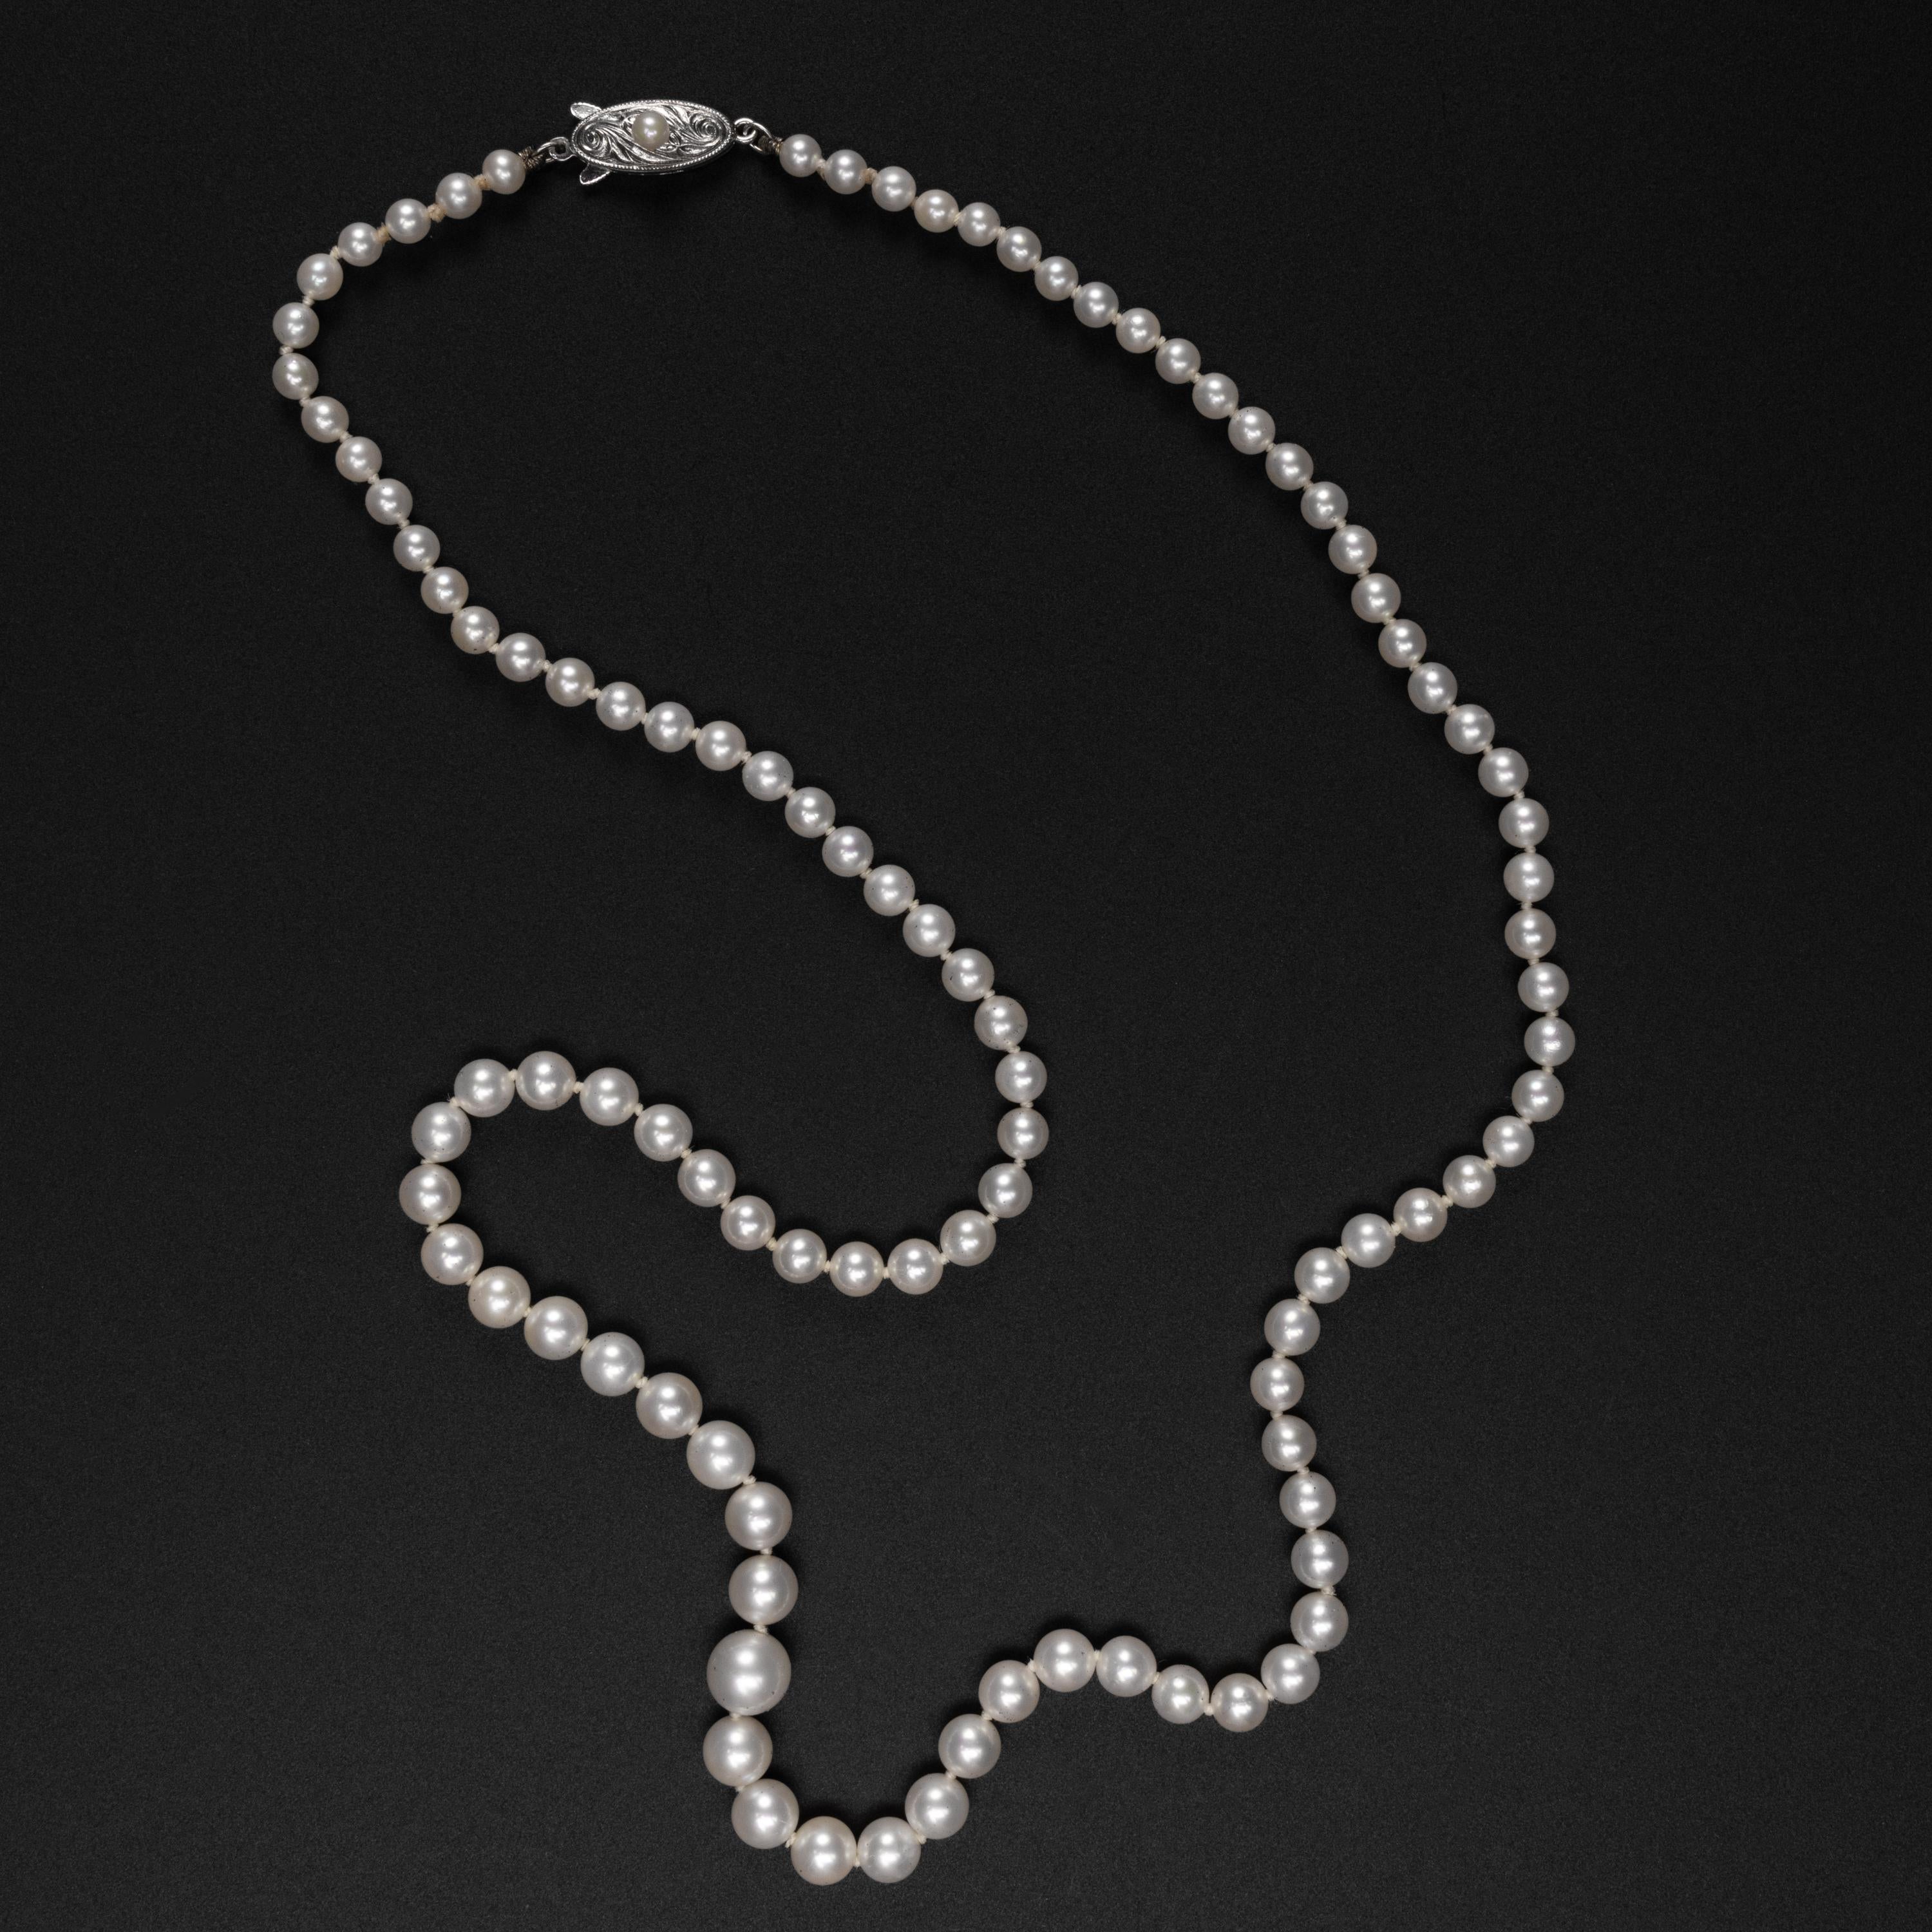 This is a minty strand of original cultured Akoya pearls by Mikimoto for Lane Crawford. The 20